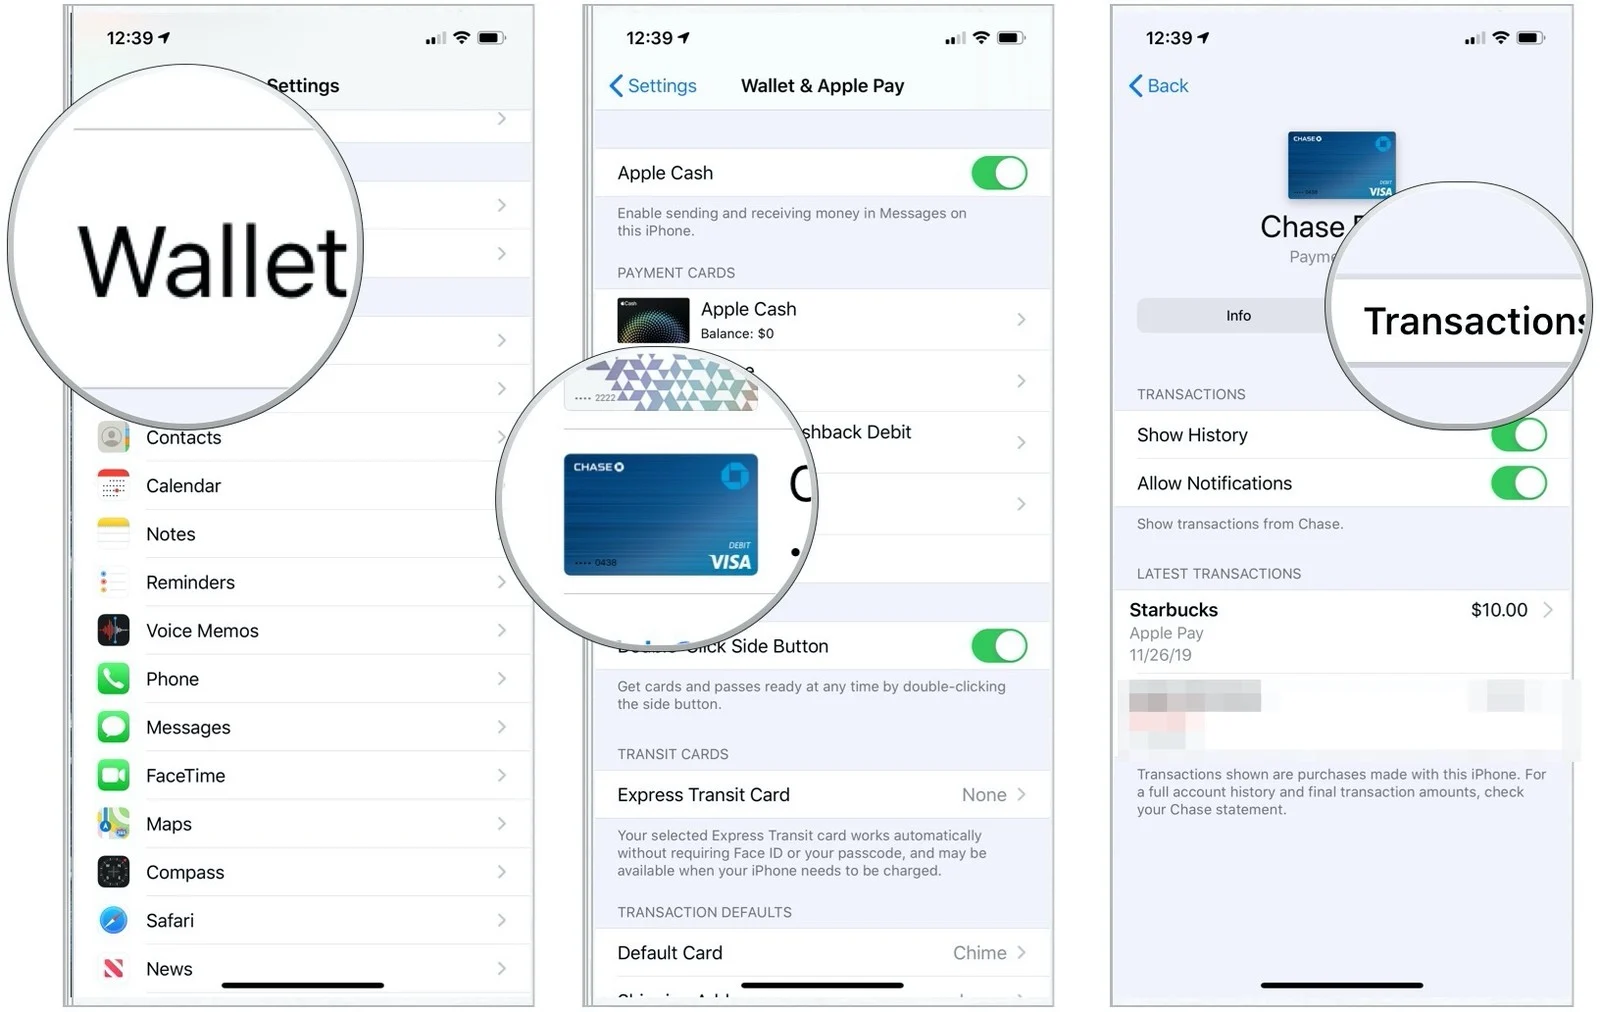 Review Apple Pay Transactions